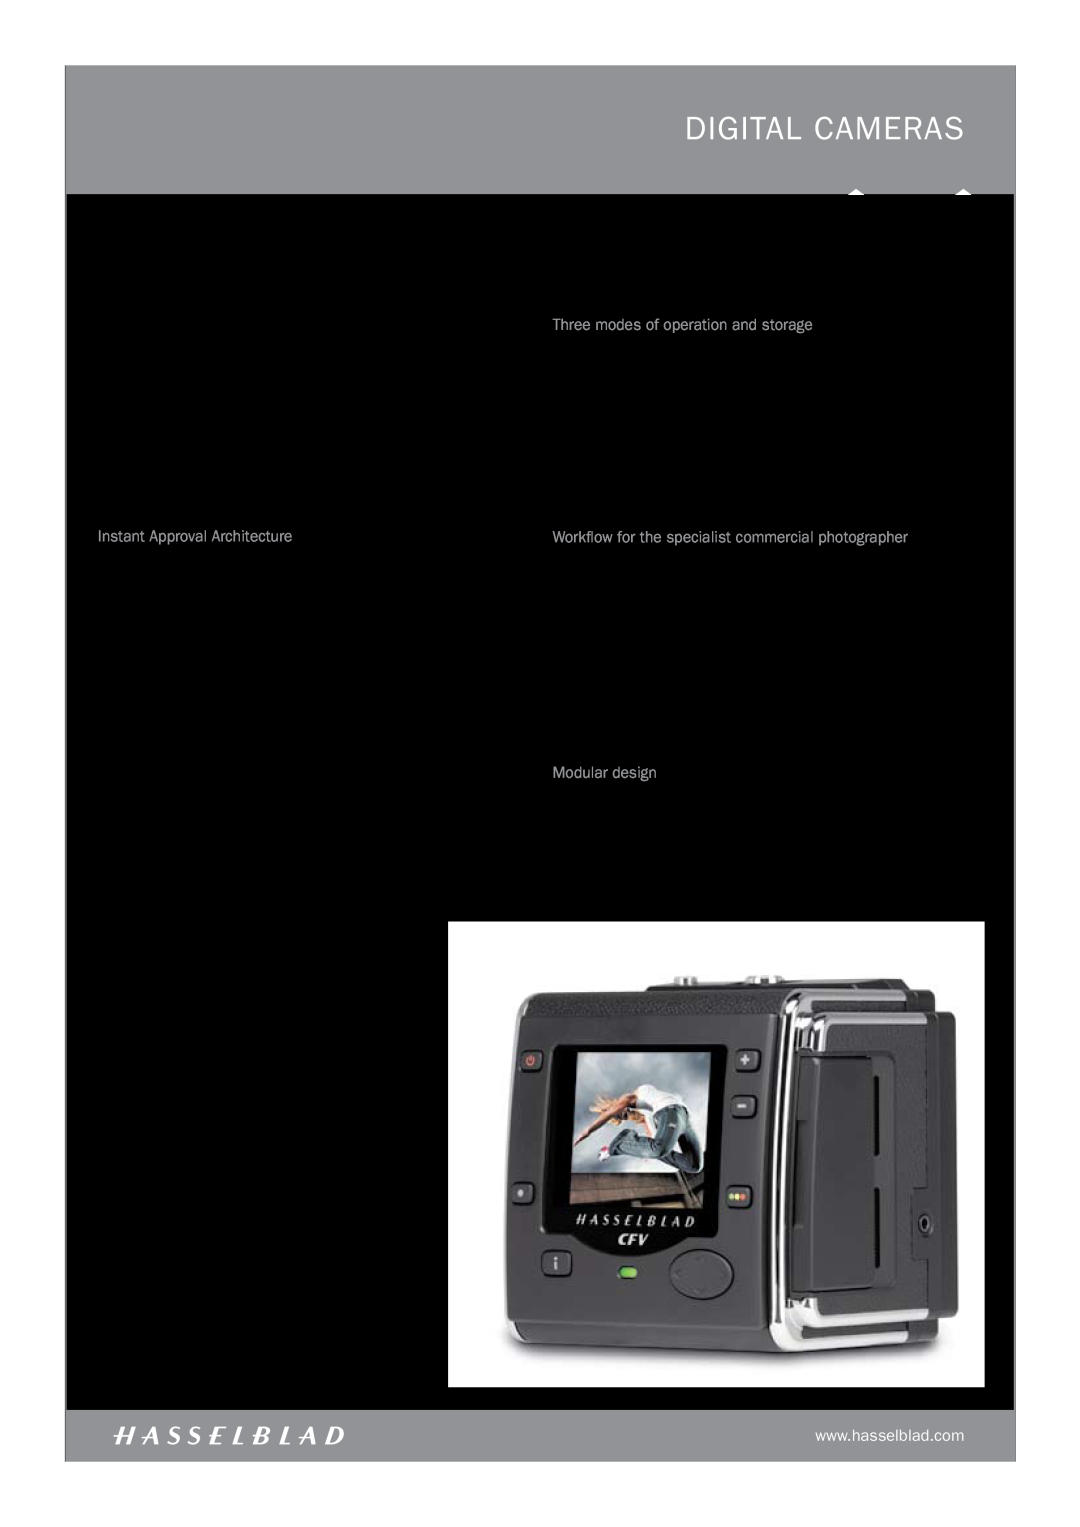 Hasselblad 503CWDII Three modes of operation and storage, Instant Approval Architecture, Modular design, digital CAMERAS 